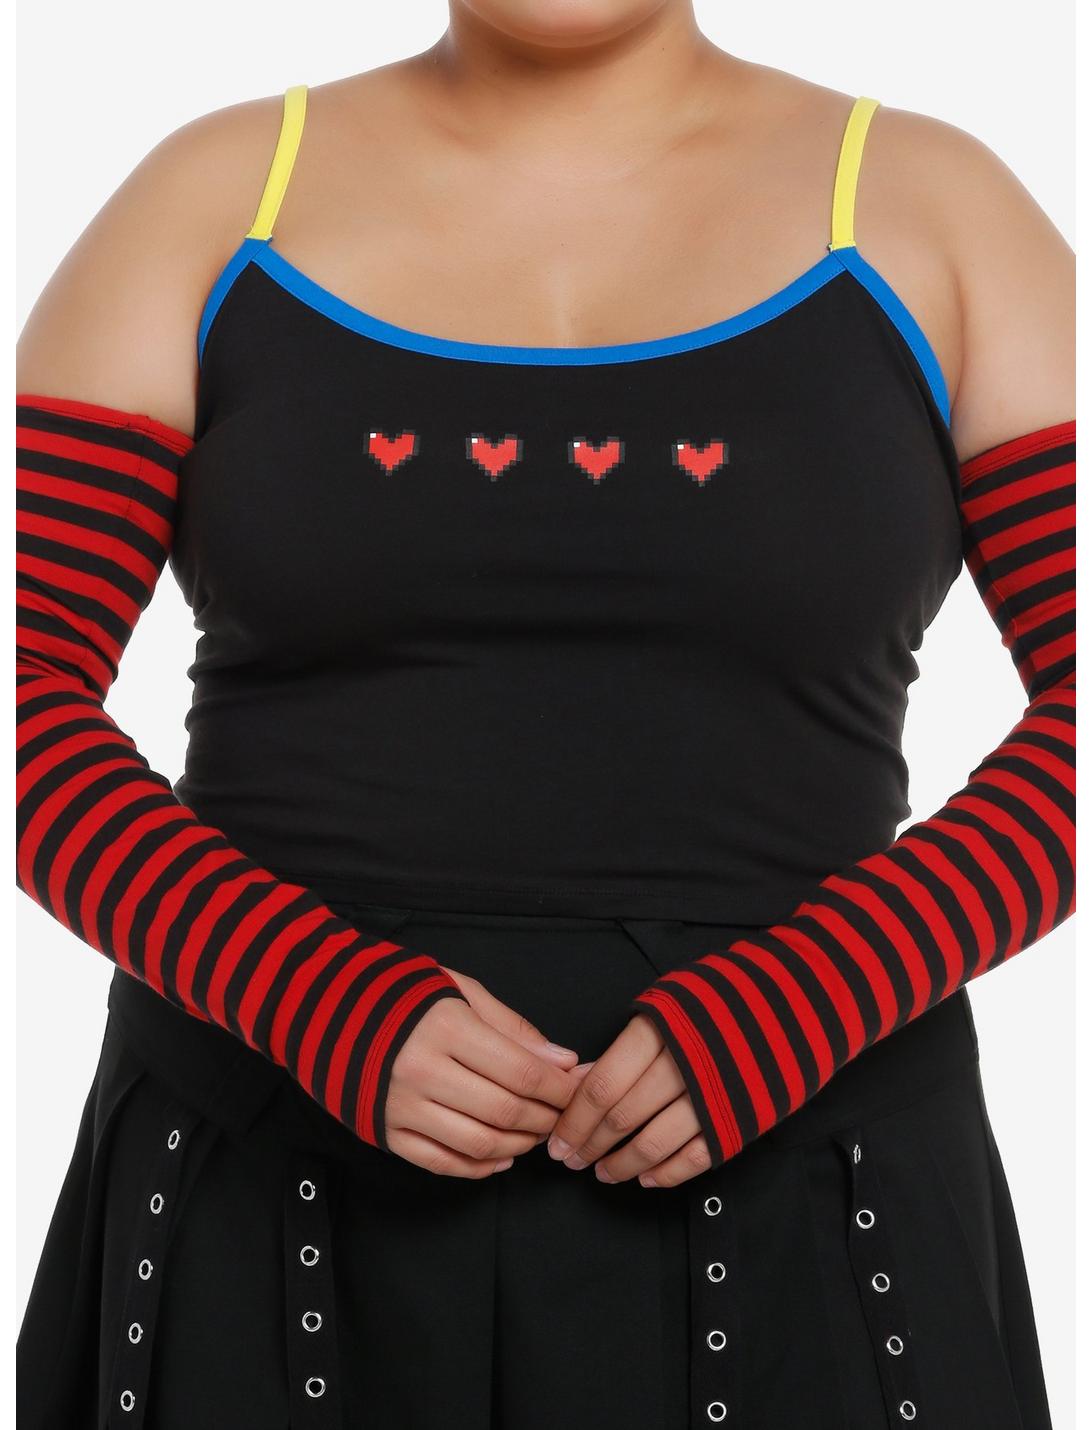 Social Collision Hearts Girls Cami With Arm Warmers Plus Size, BLACK, hi-res